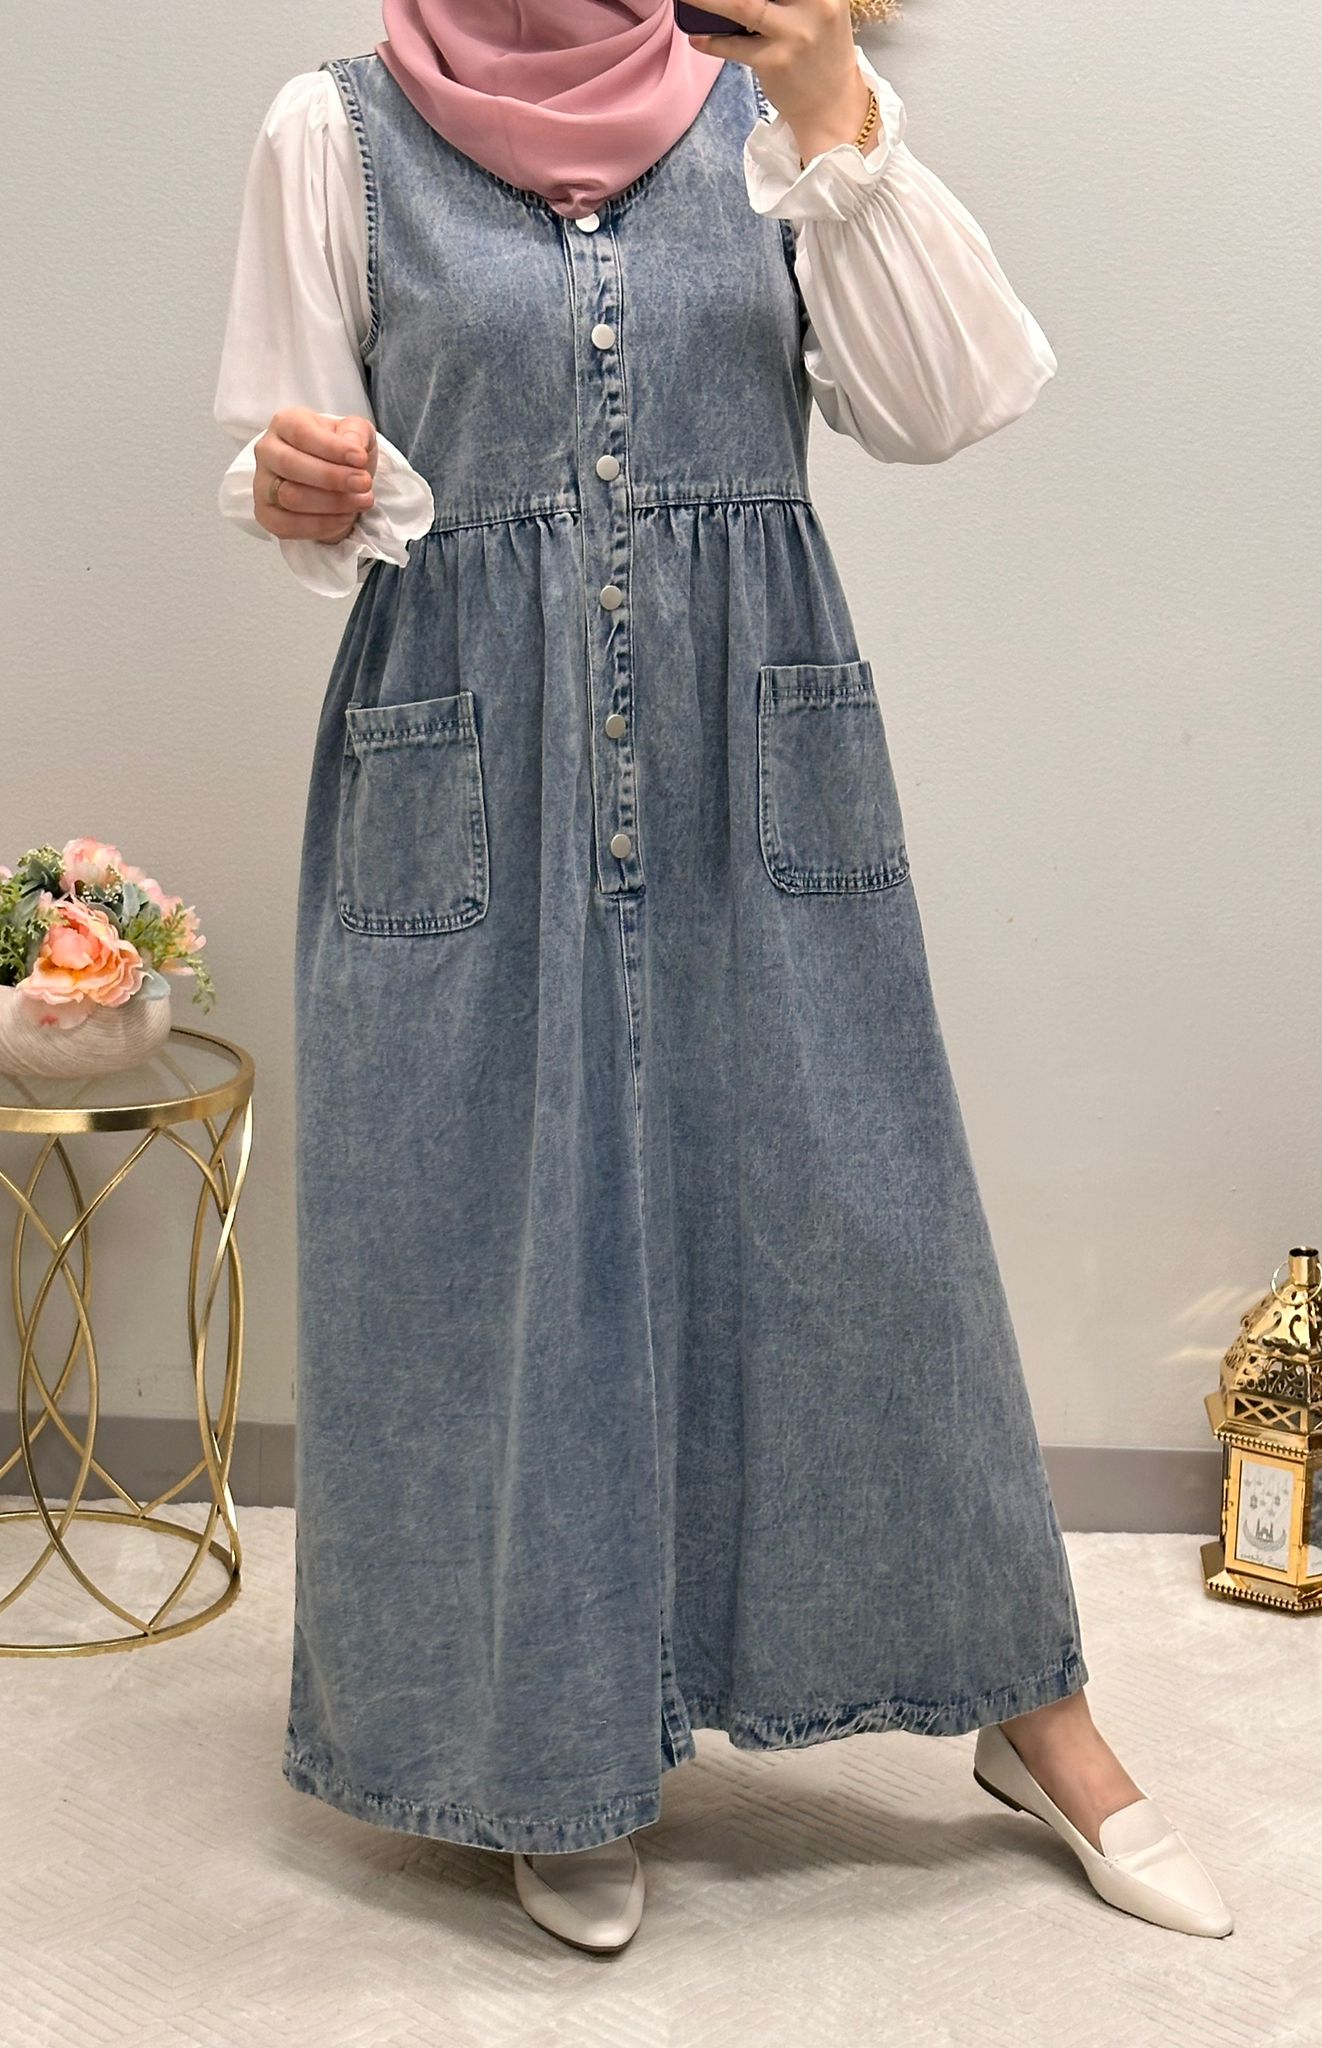 Two-pieces jeans dress with white shirt underneath